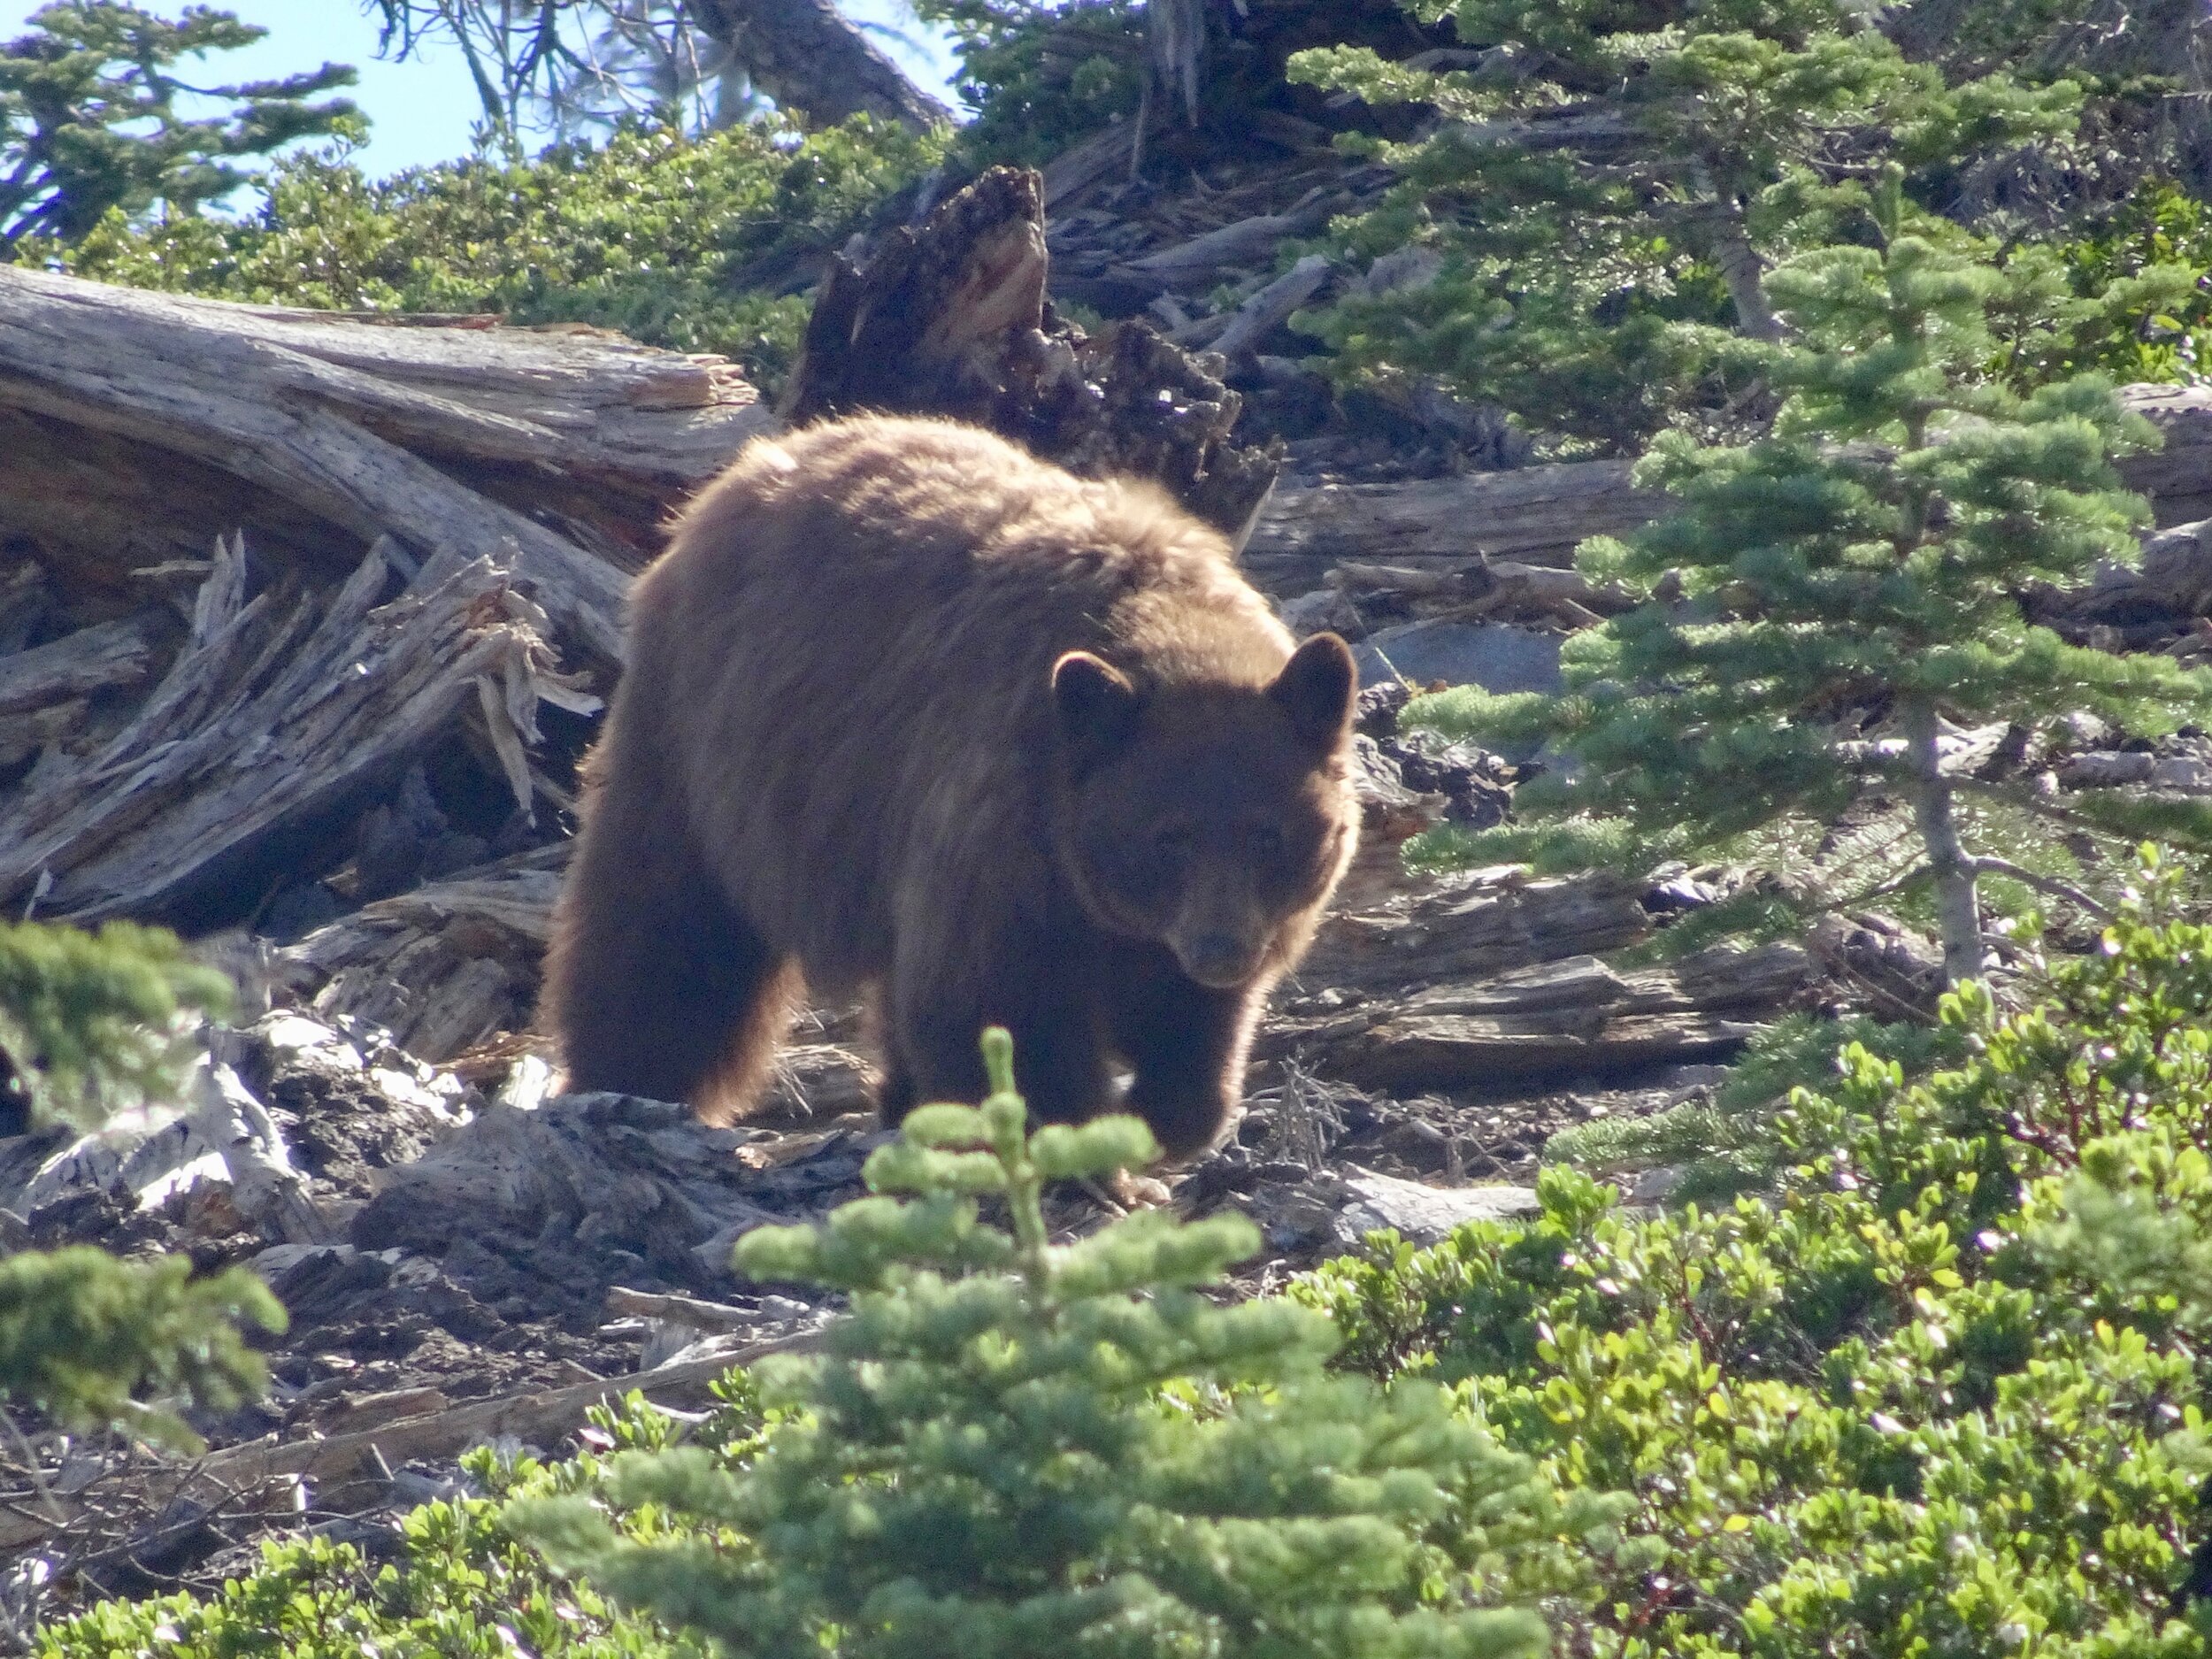 Photo 3 - Close up of bear walking our way. Notice you can tell it's a black bear vs a grizzly b/c its rump is higher than its hump.  Photo by Karen Boudreaux, 6/5/21